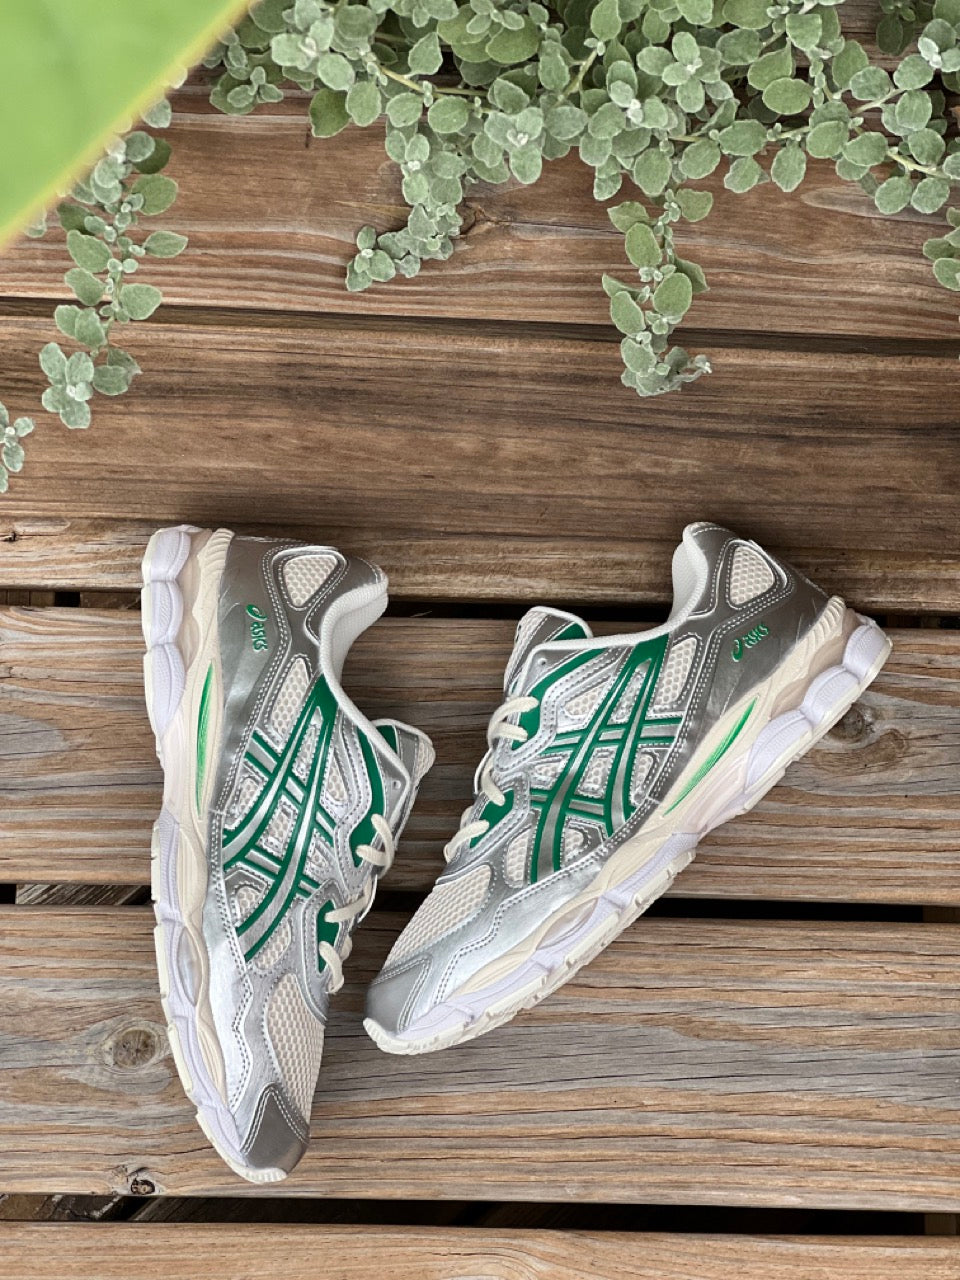 Image of the ASICS GEL-NYC Kale Pack in Birch Silver in a wooded green background